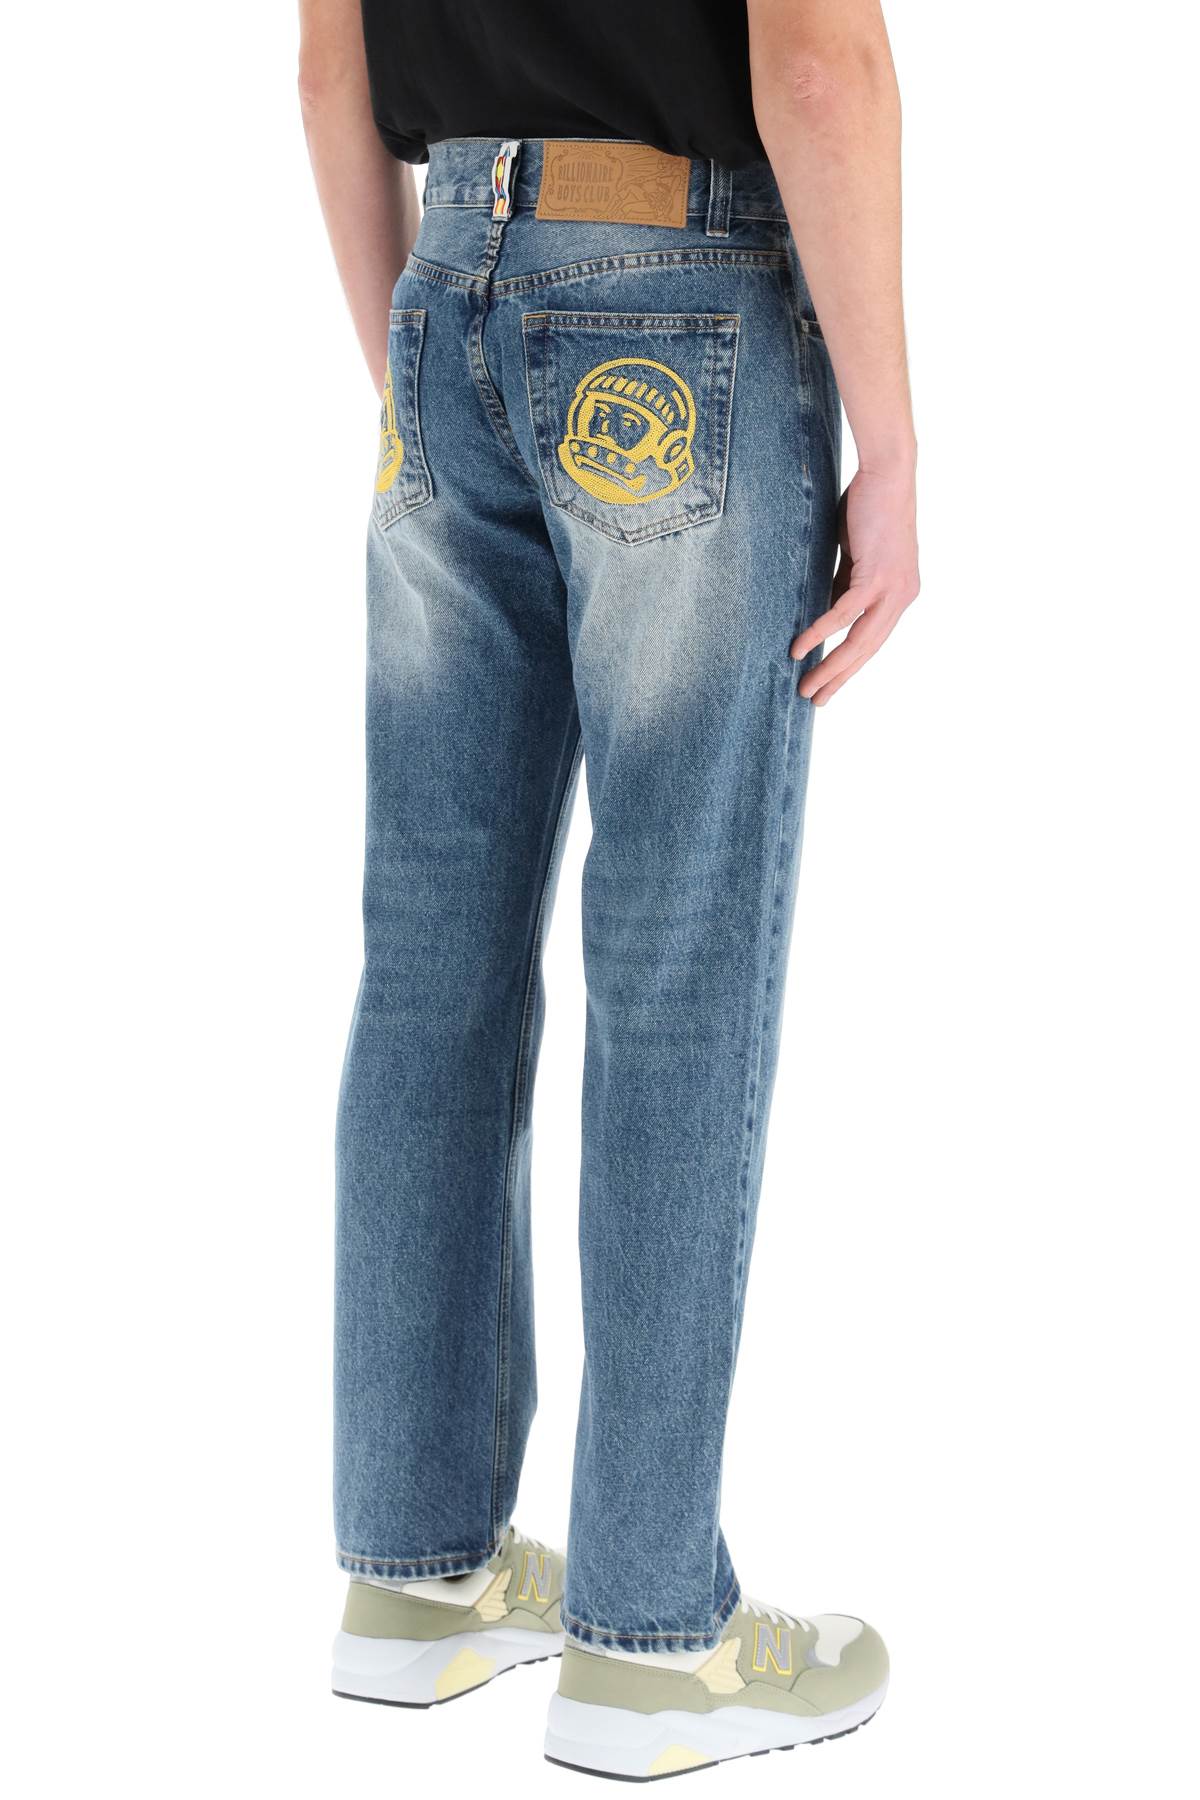 Shop Billionaire Boys Club Jeans With Embroidery Decorations In Indigo (blue)